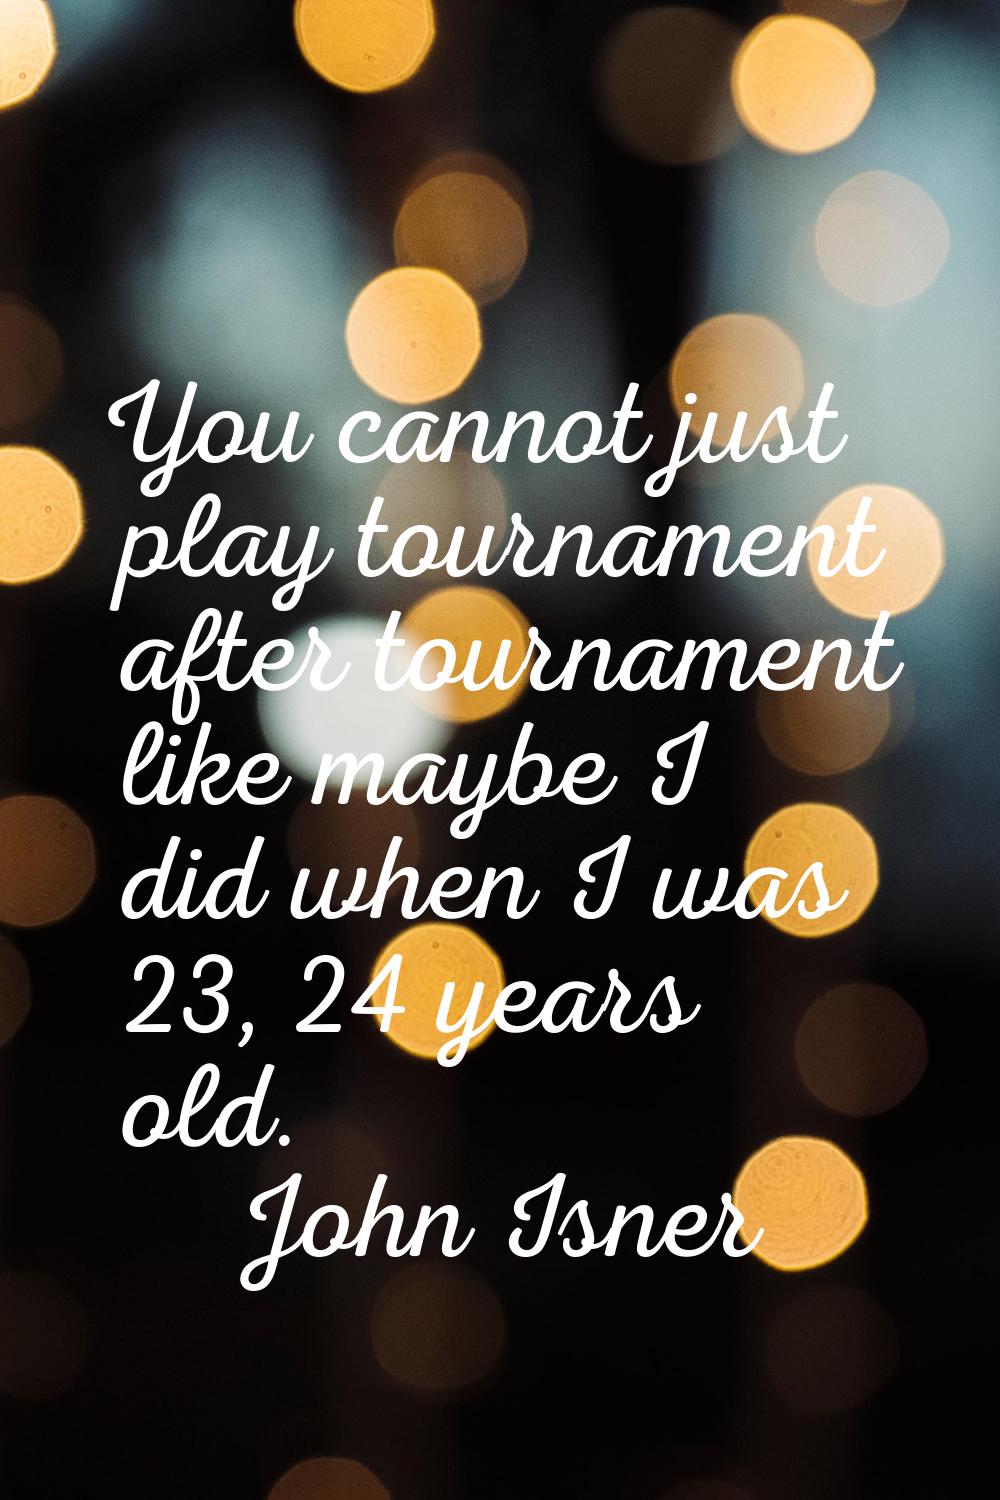 You cannot just play tournament after tournament like maybe I did when I was 23, 24 years old.